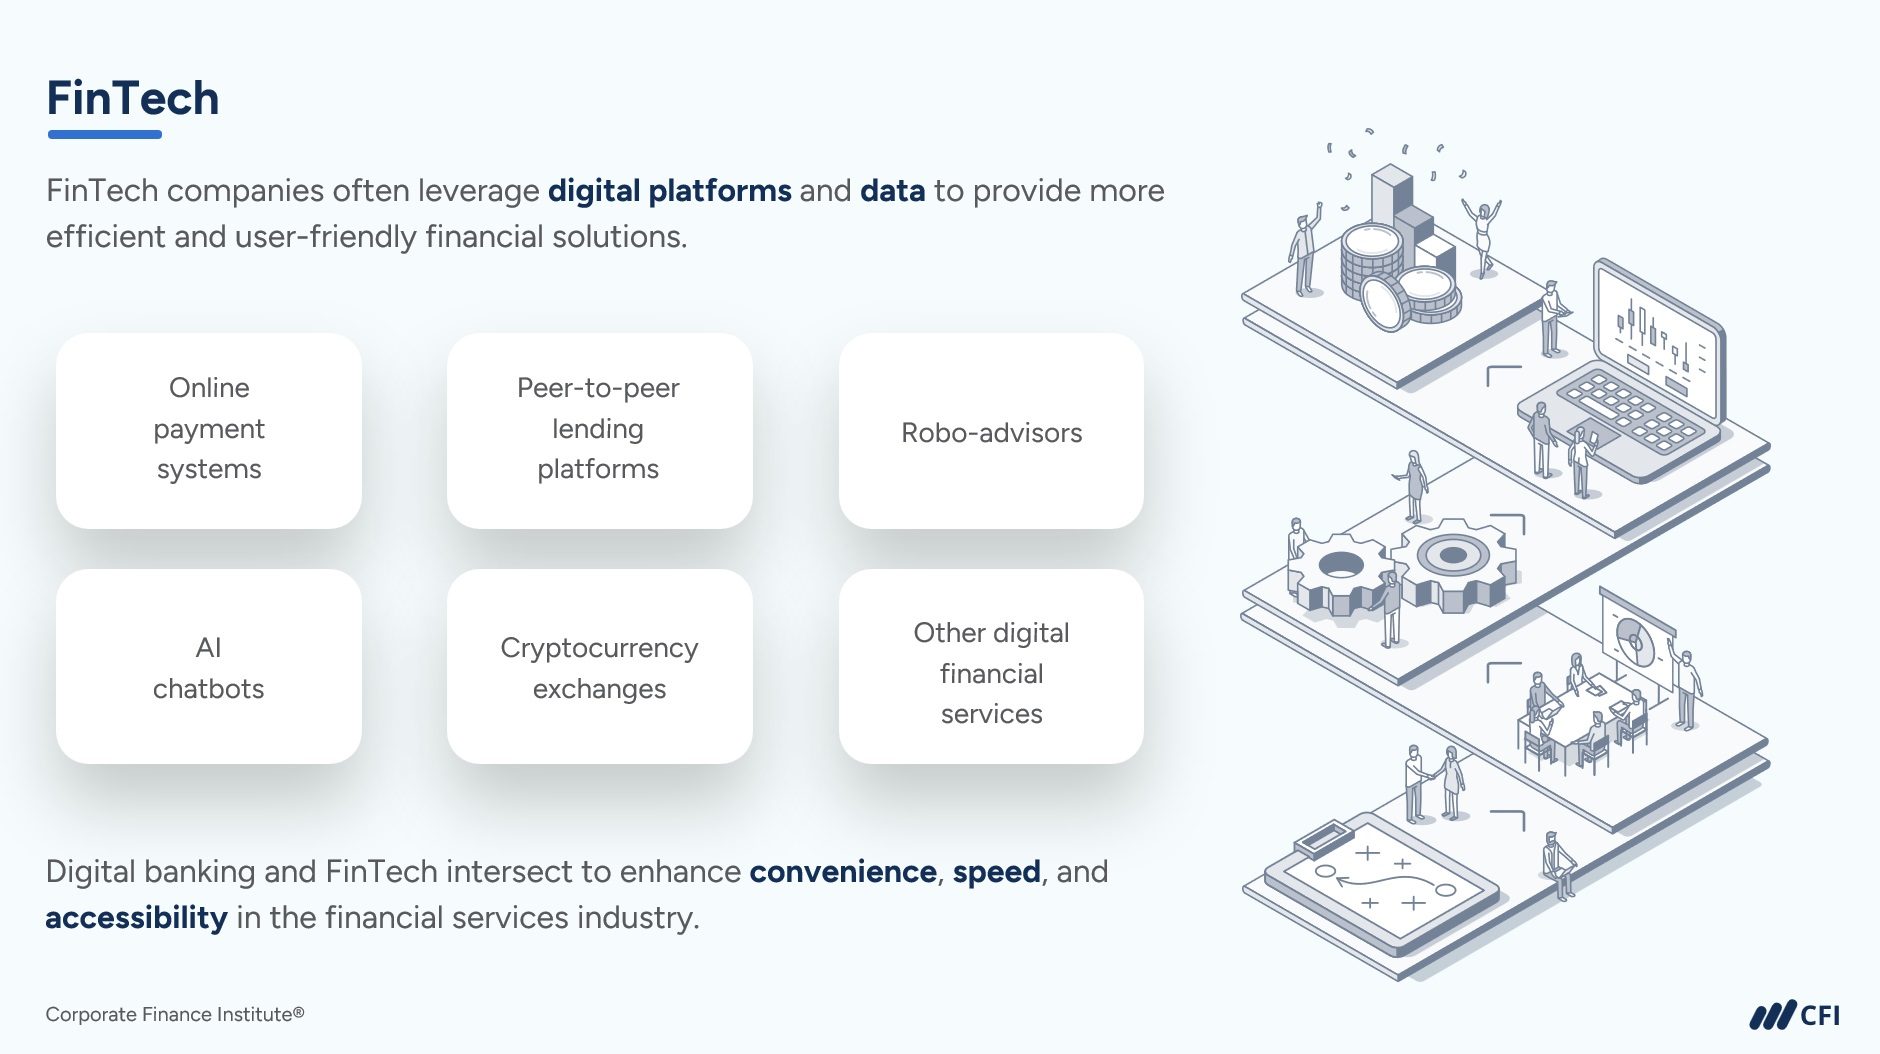 an image with some details about fintech